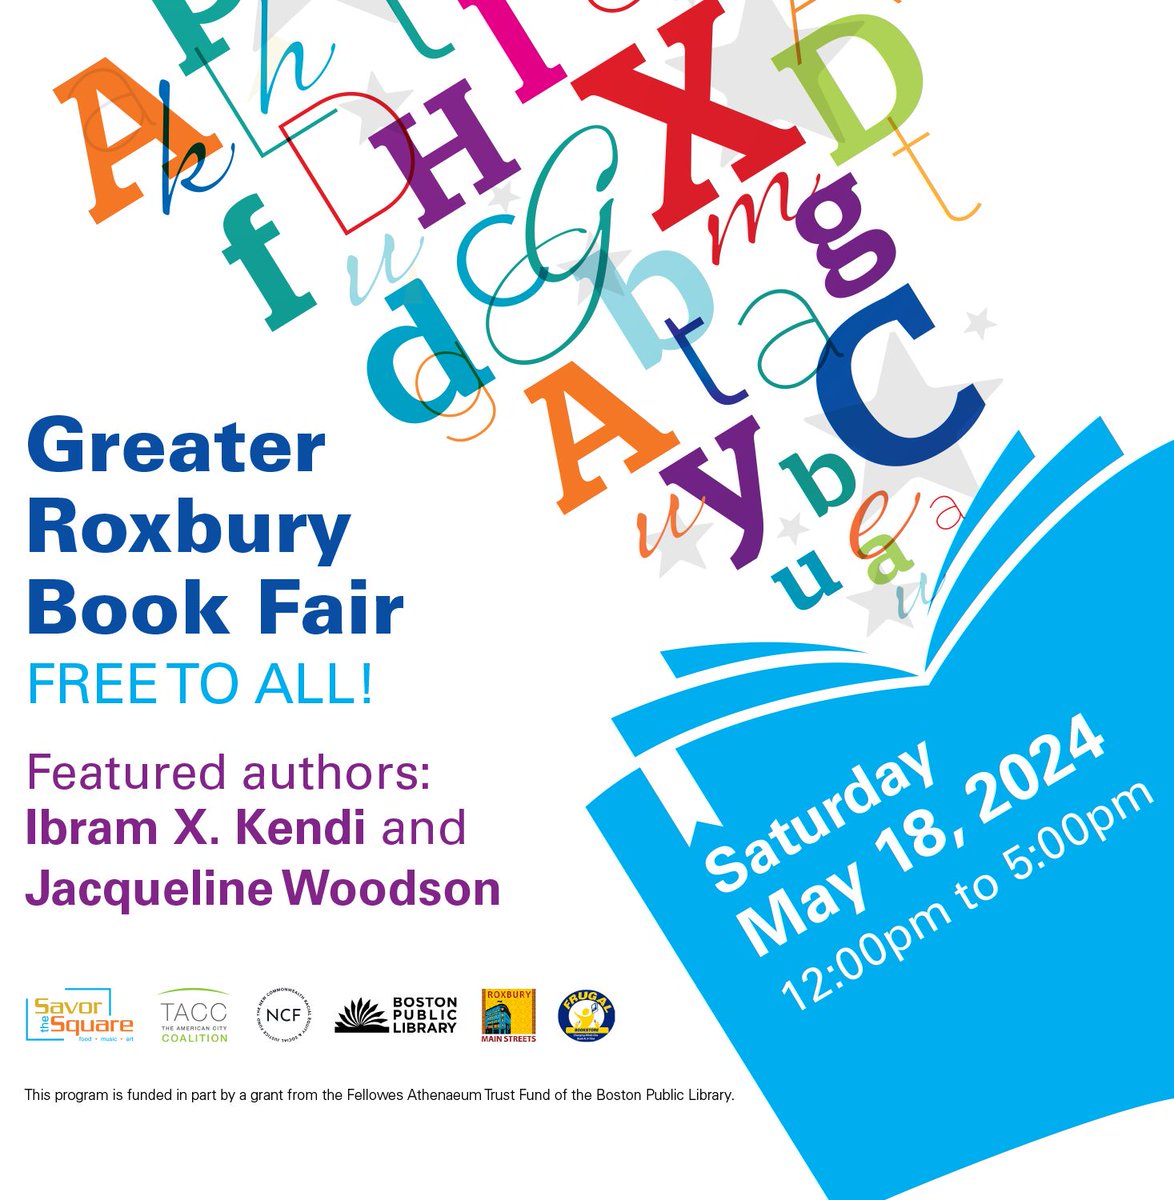 I'm thrilled to be part of the Great Roxbury Book Fair on May 18th, Noon to 5 pm featuring @JackieWoodson and @ibramxk. @annastanisz and I will be representing @BarefootBooks as authors. #BookFair #Roxbury